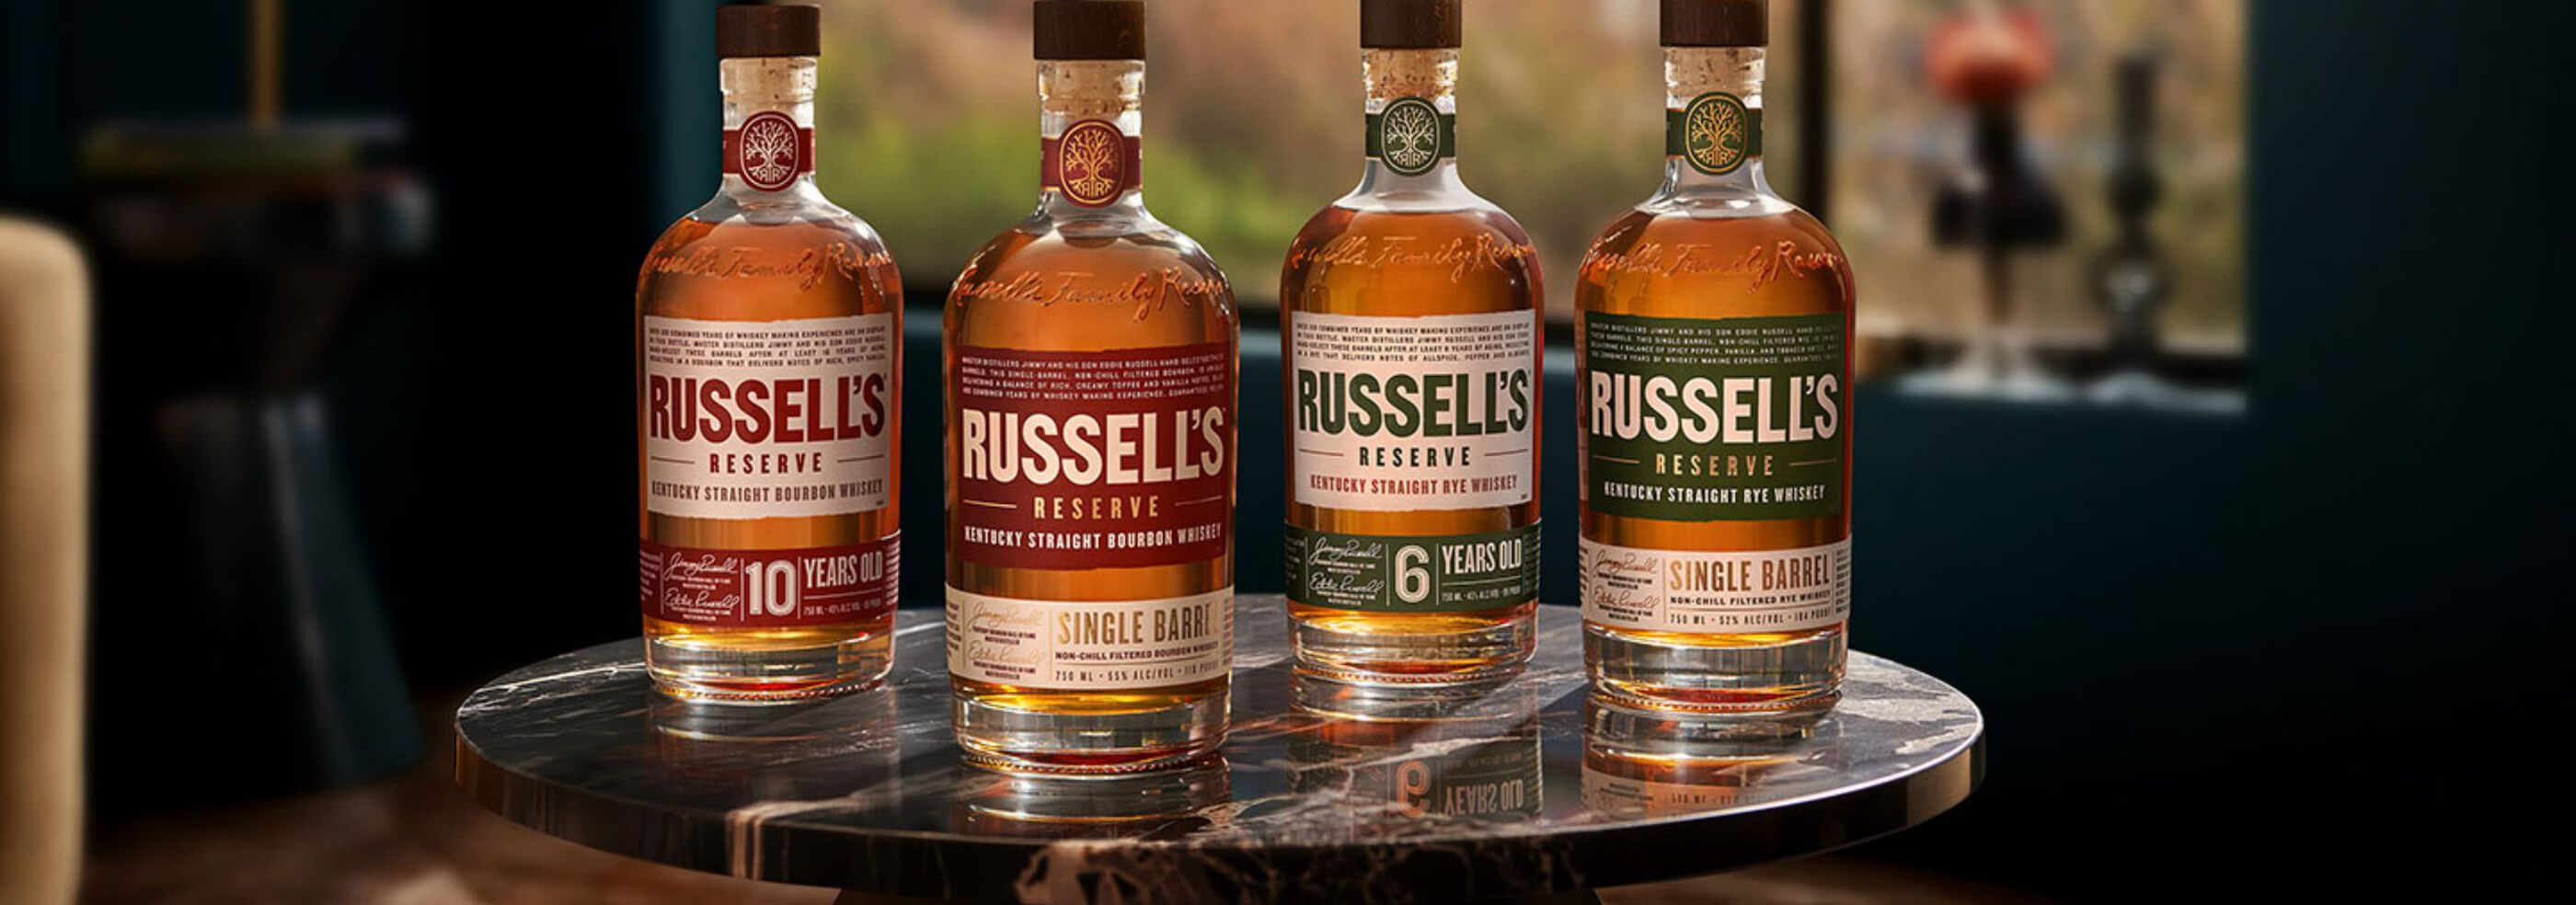 Russell's Reserve Variety/Collection